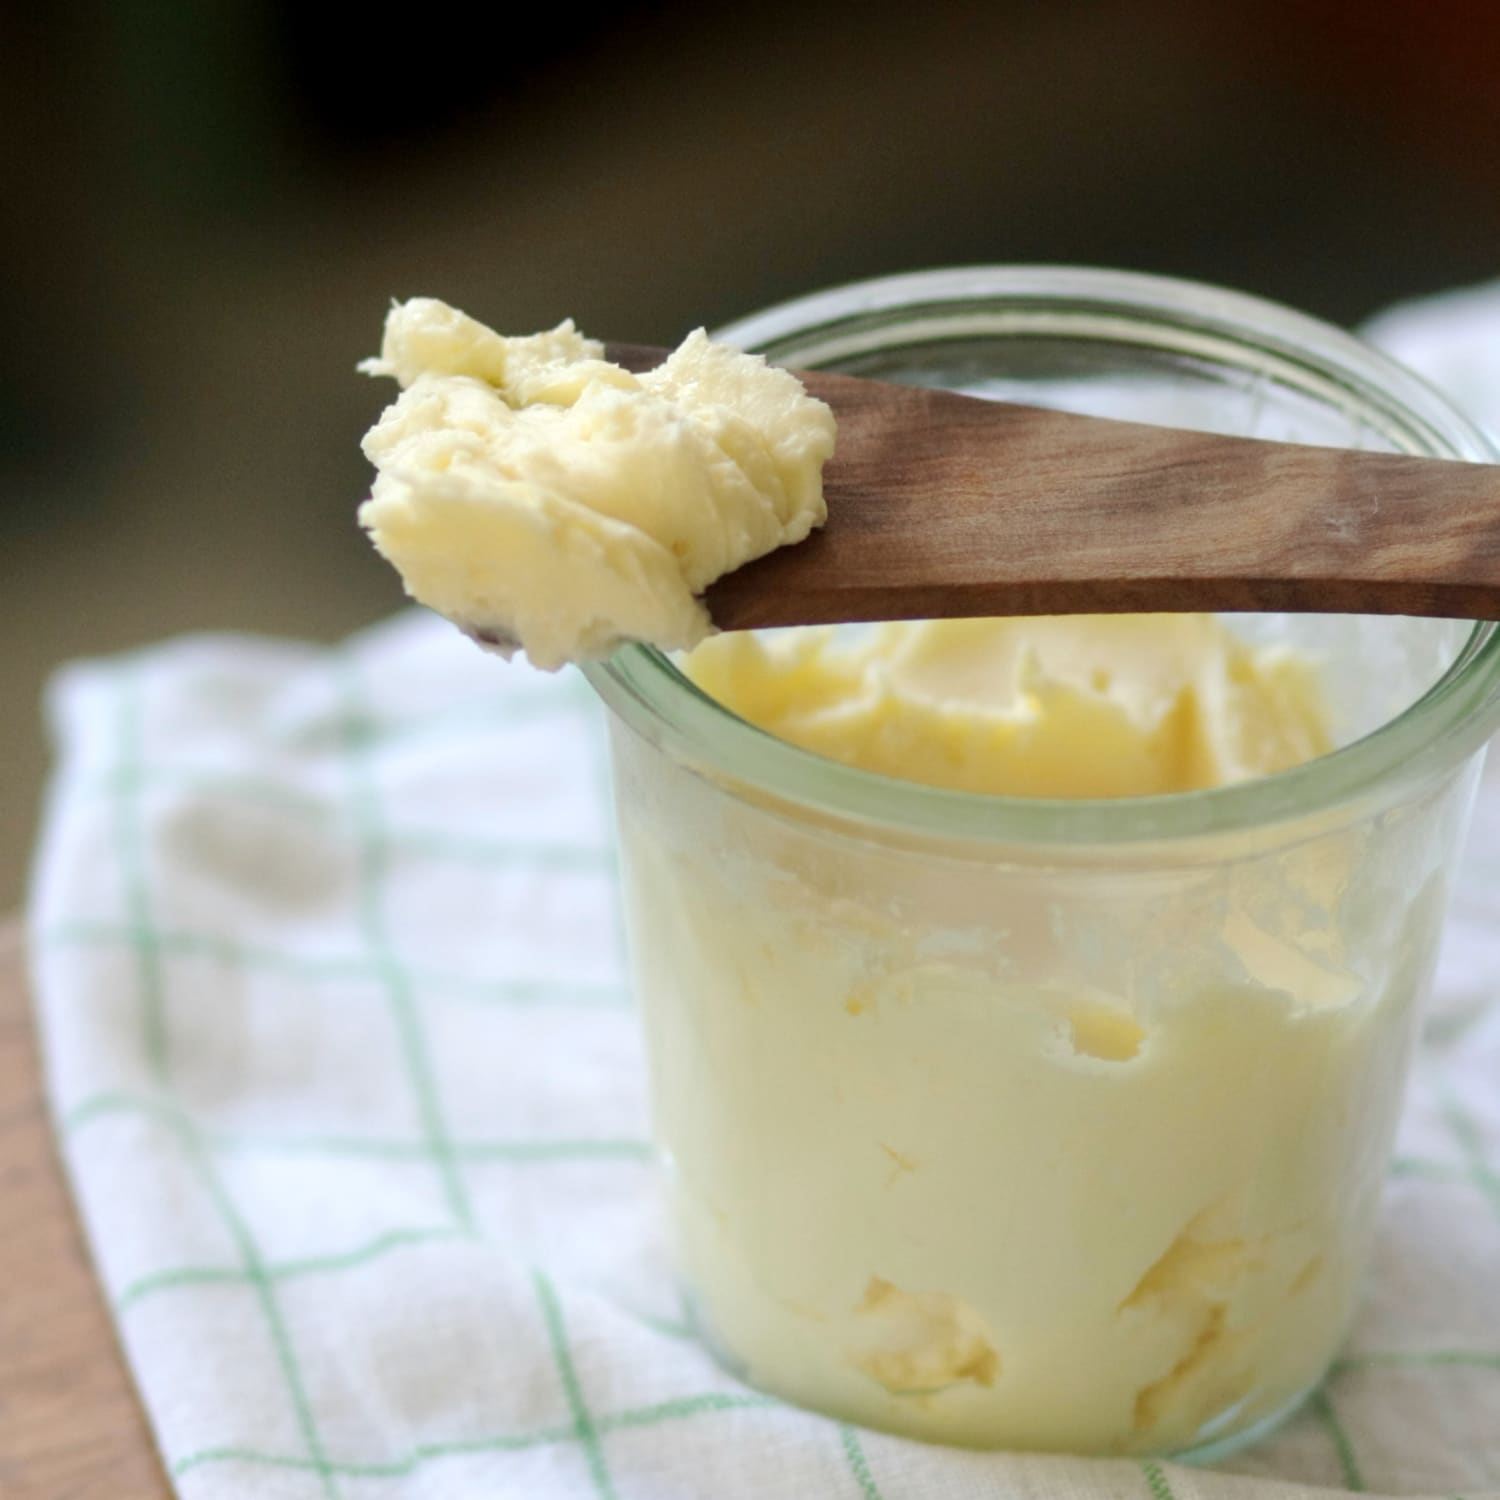 How To Make Butter (and Cultured Butter!)